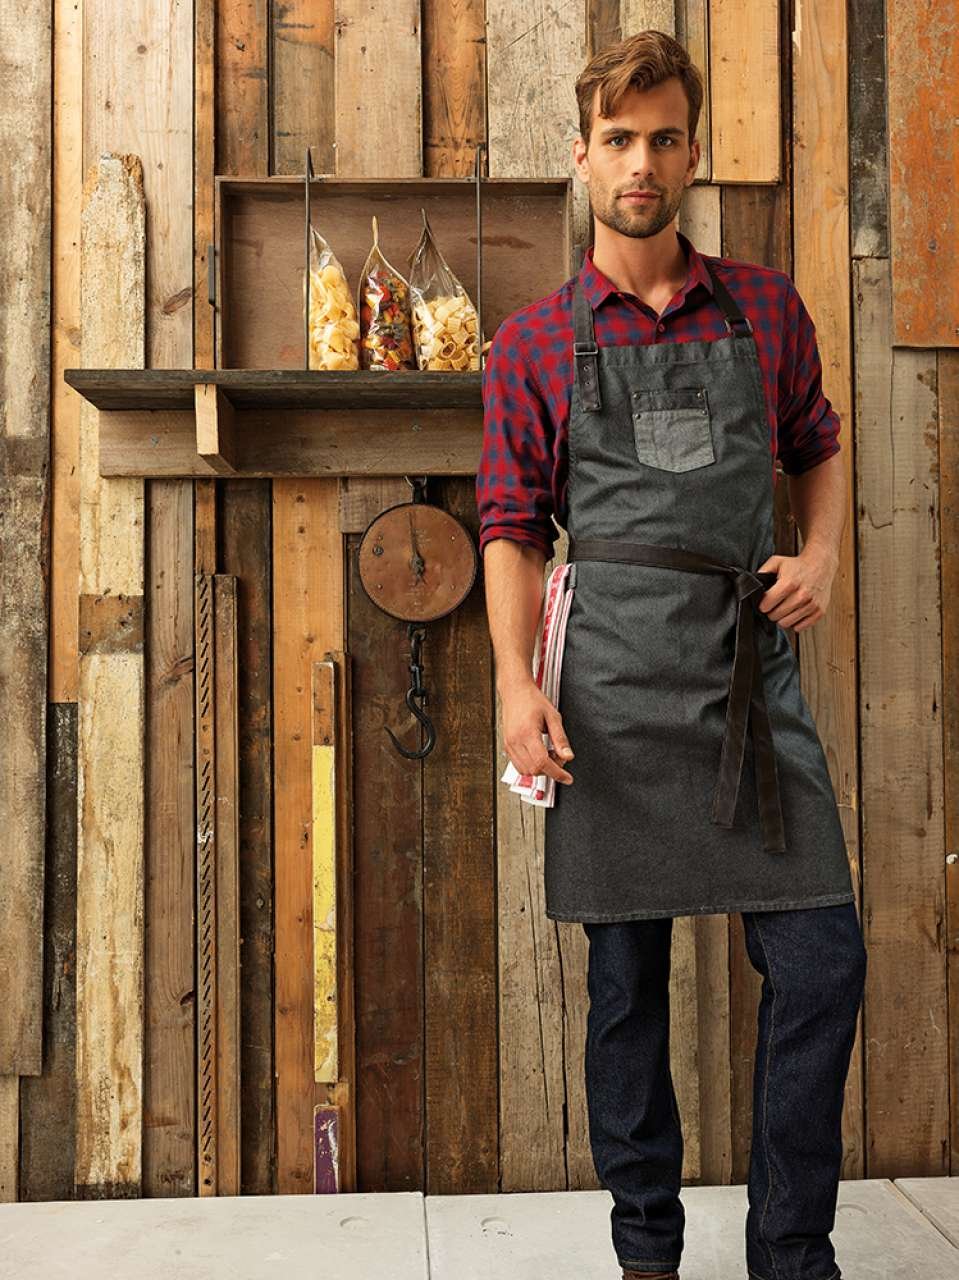 Division Waxed Look Denim Bib Apron With Faux Leatherdivision-waxed-look-denim-bib-apron-with-faux-leather-3974.jpg